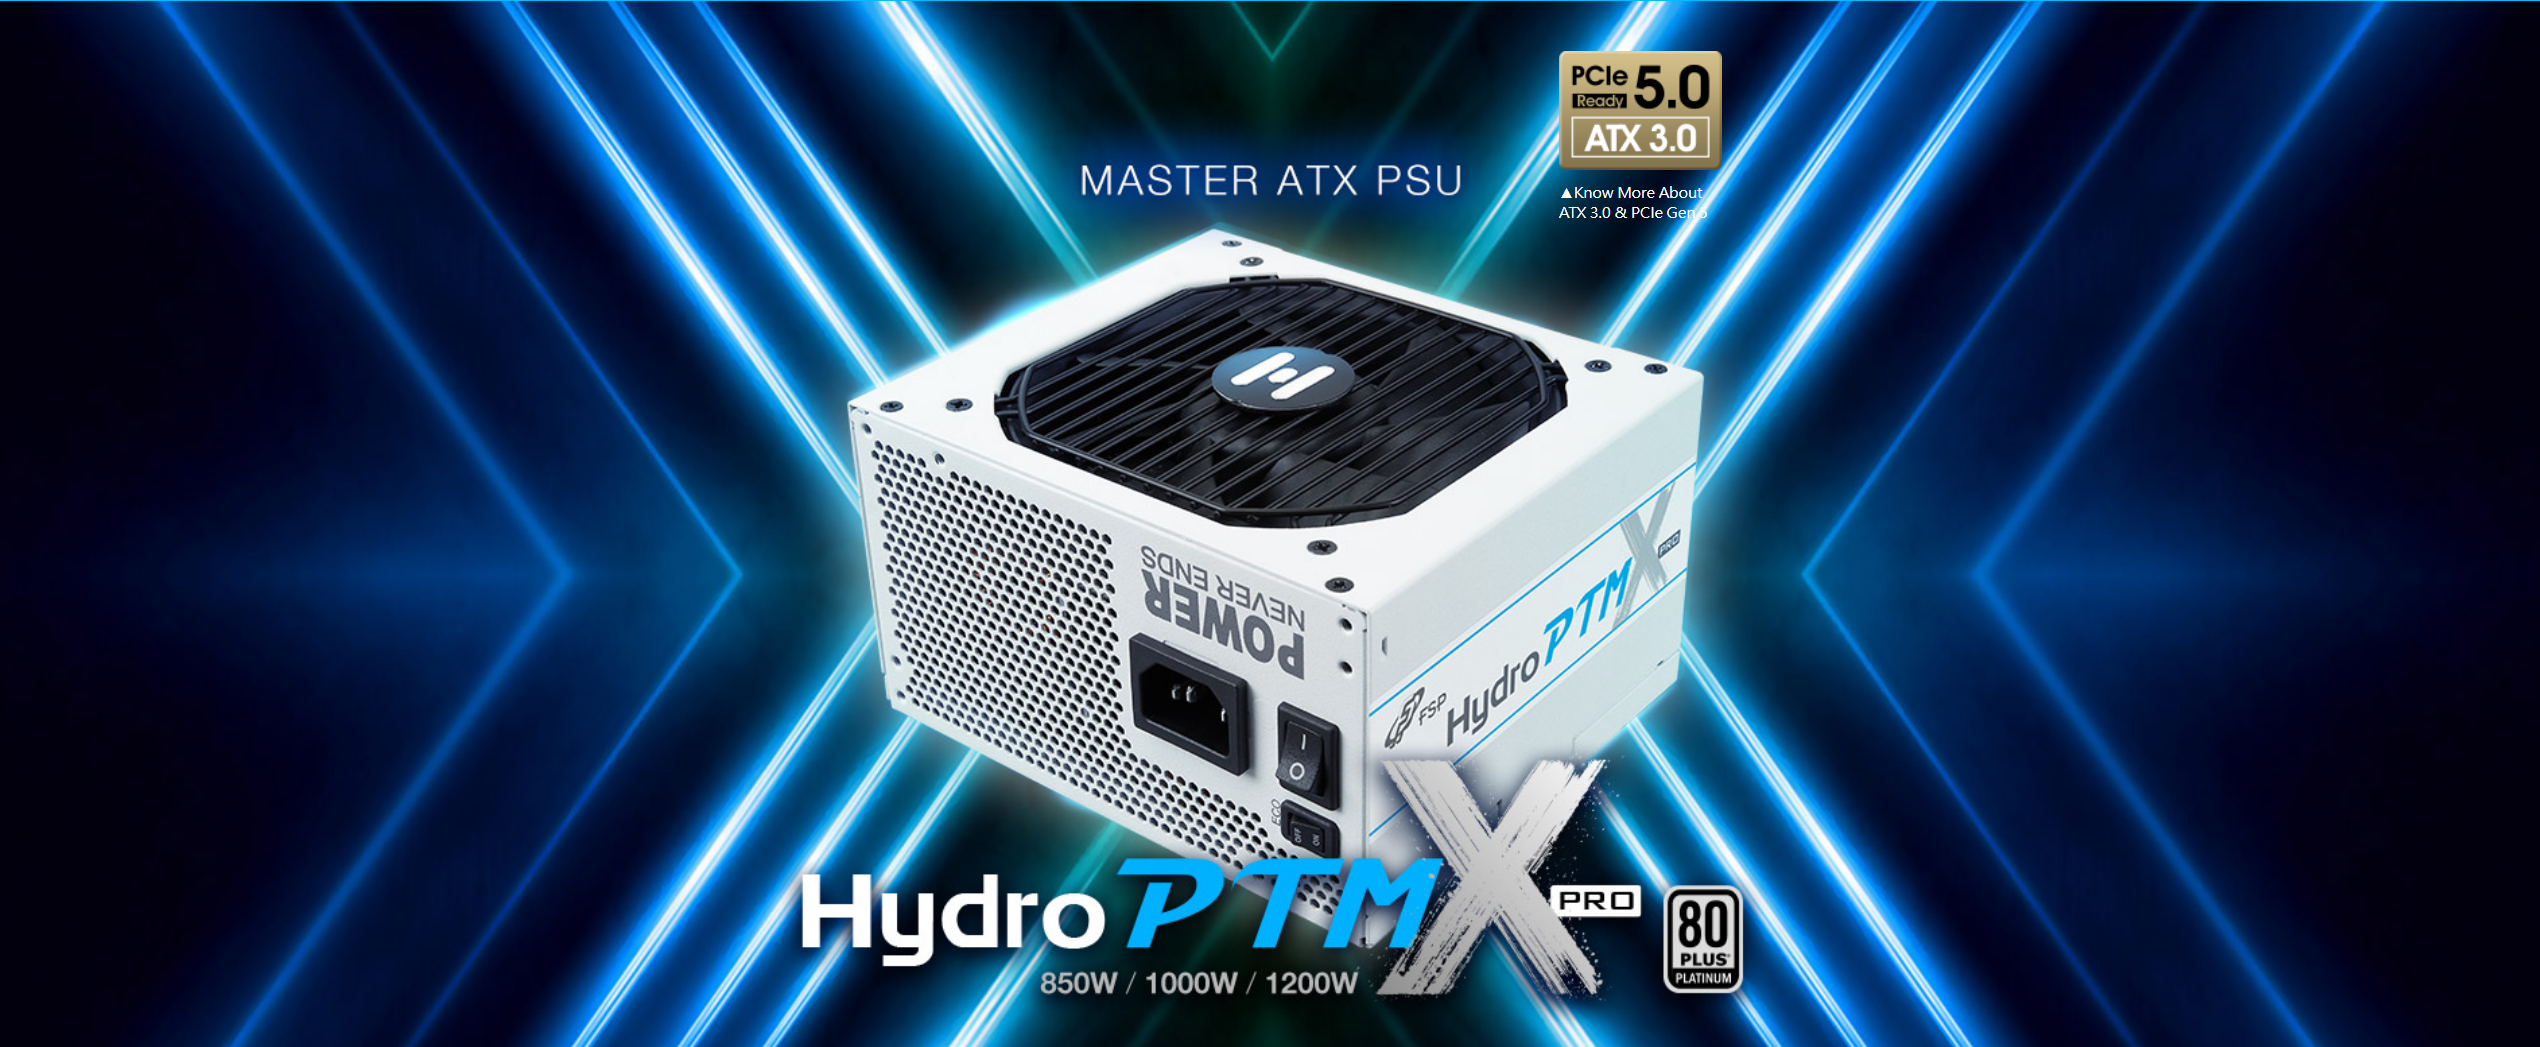 A large marketing image providing additional information about the product FSP Hydro PTM PRO 1200W Platinum PCIe 5.0 ATX Modular PSU - White - Additional alt info not provided